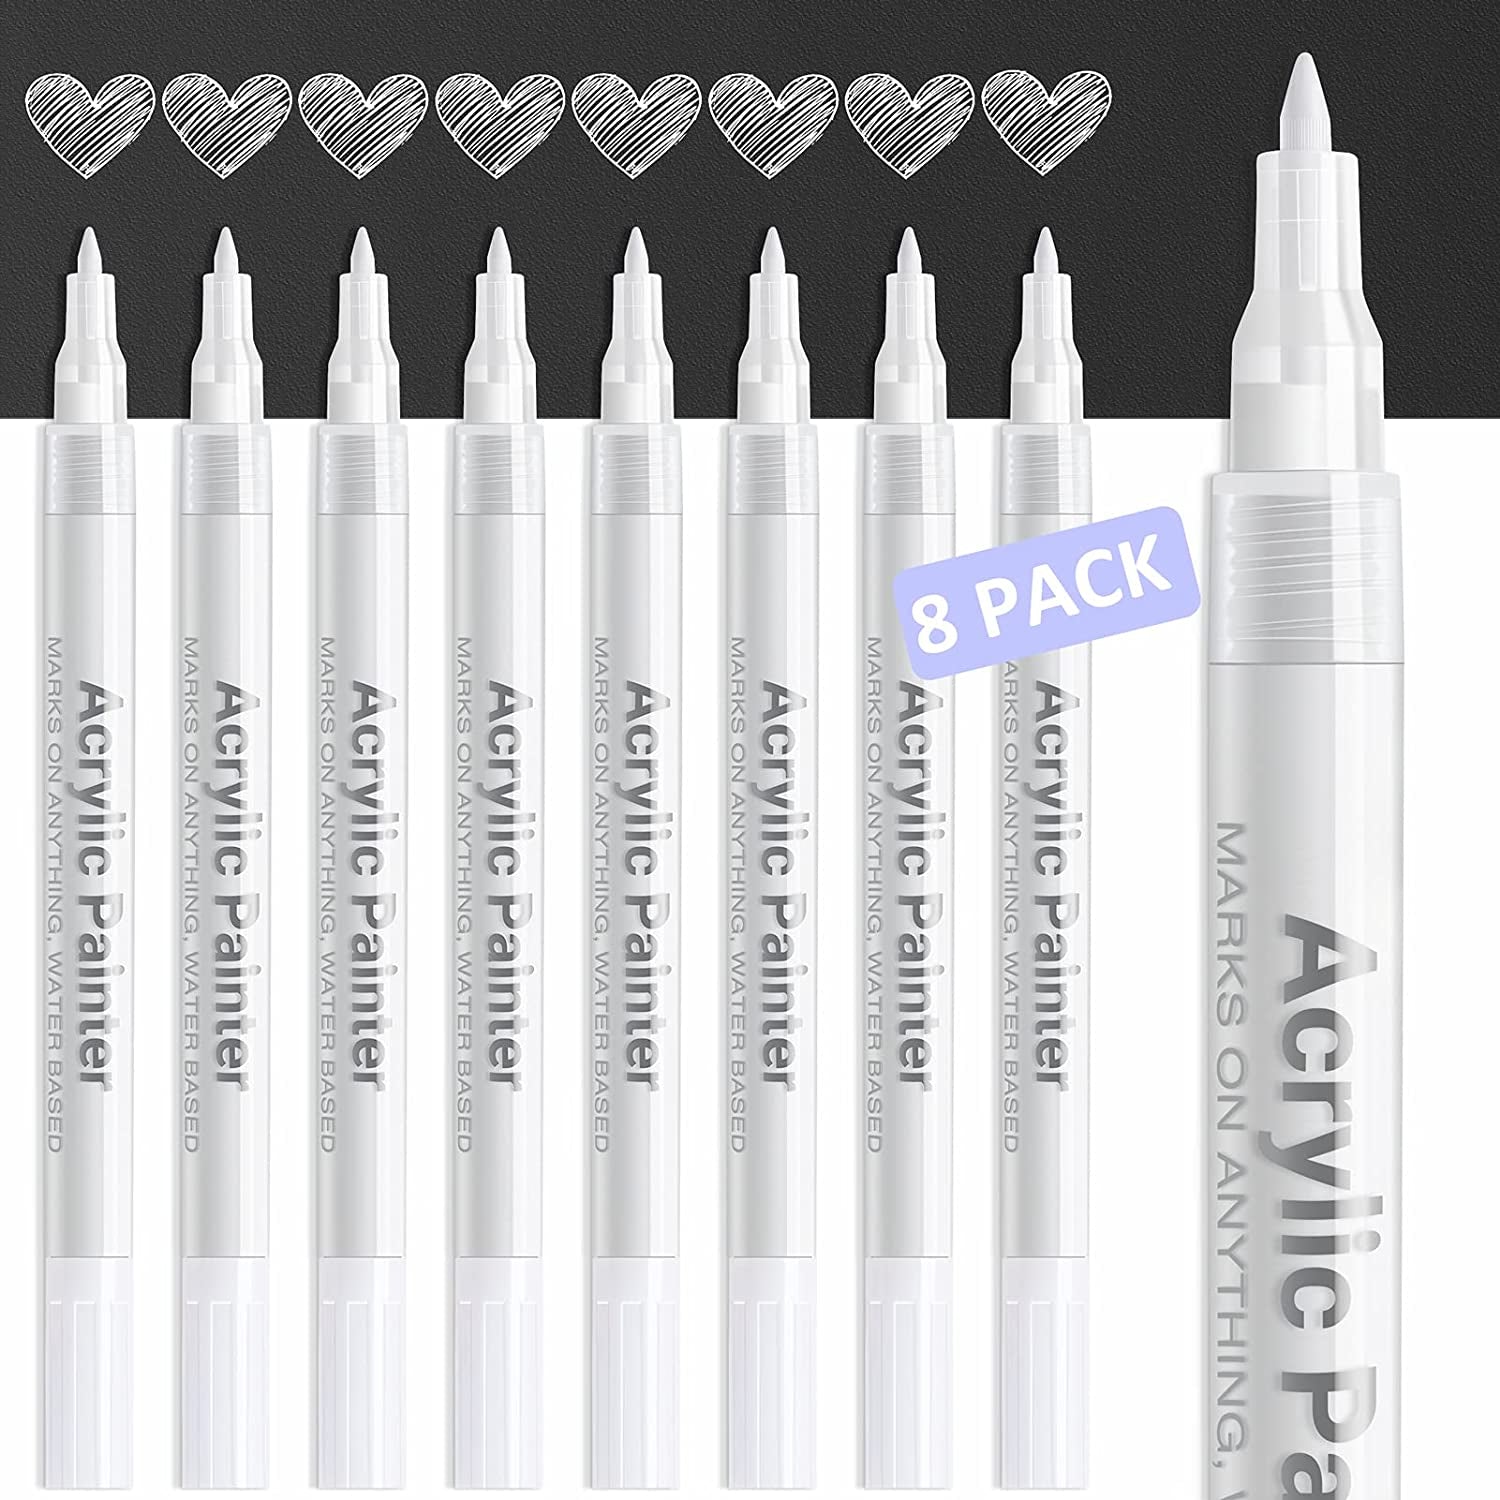 White Paint Pen Acrylic Marker: 8 Pack 0.7Mm White Paint Marker for Metal,  Art, Wood, Black Paper, Plastic, Ceramic, Metallic, Rock Painting, Drawing,  Extra Fine Point, Ideal for Artist & Students